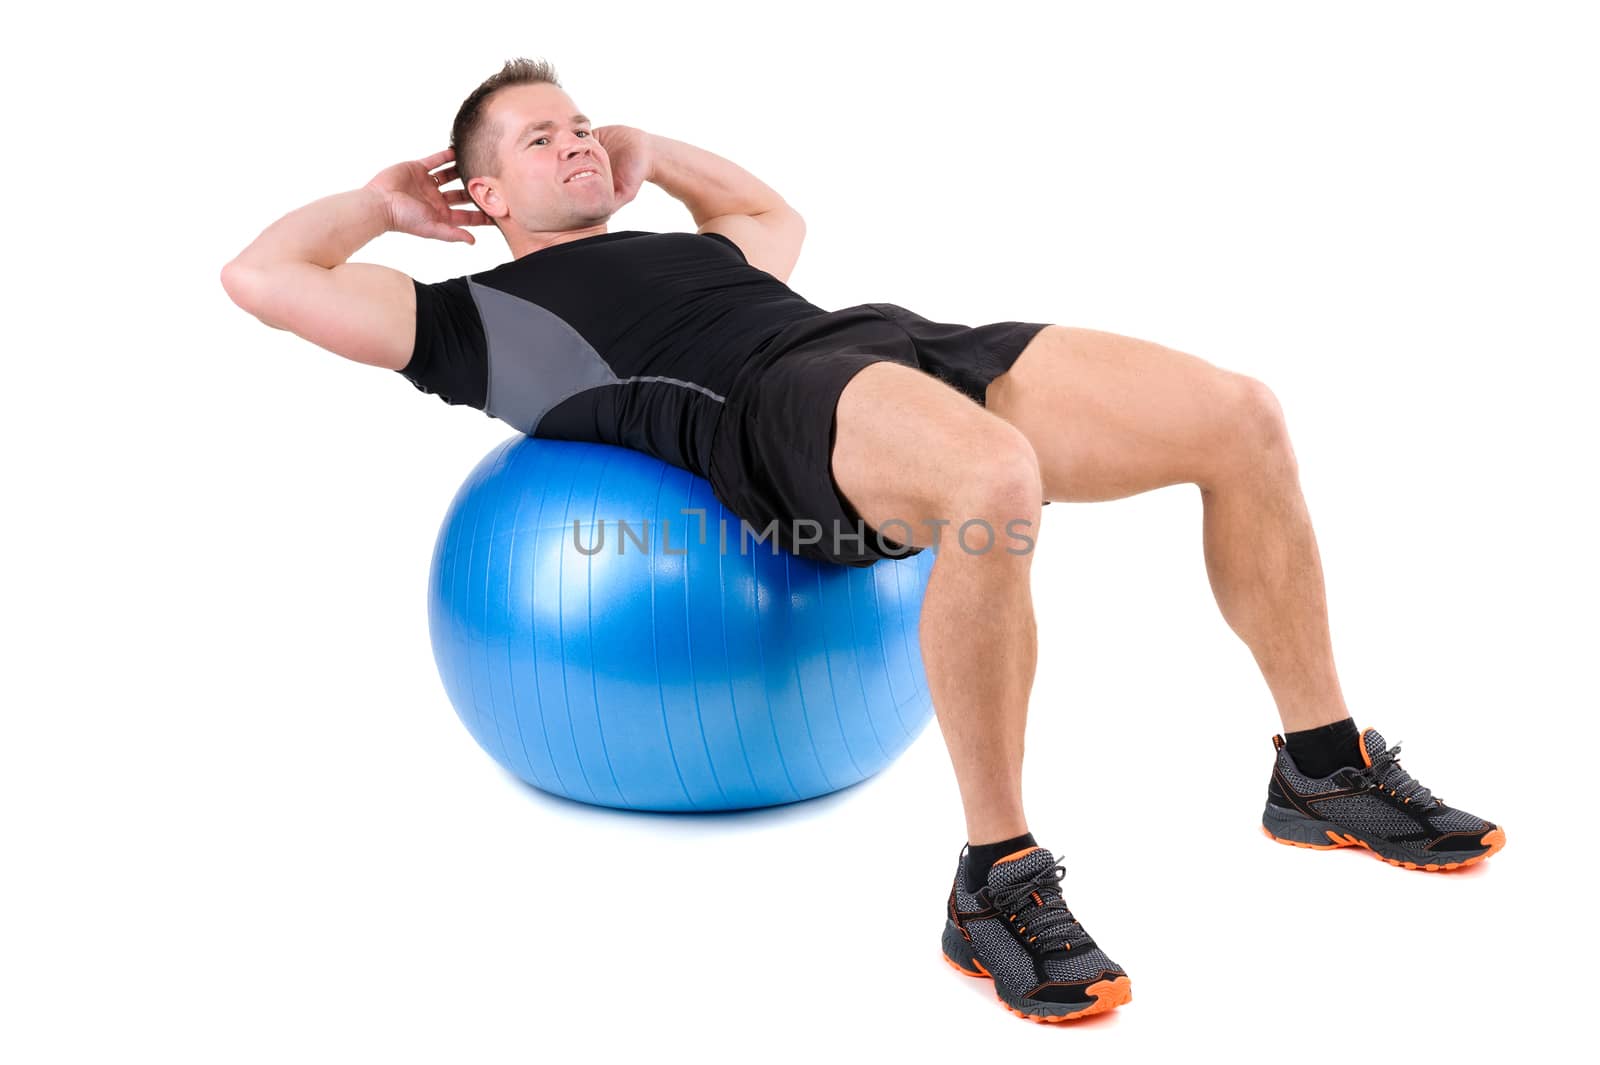 Young man shows finishing position of Abdominal Fitball Workout, isolated on white